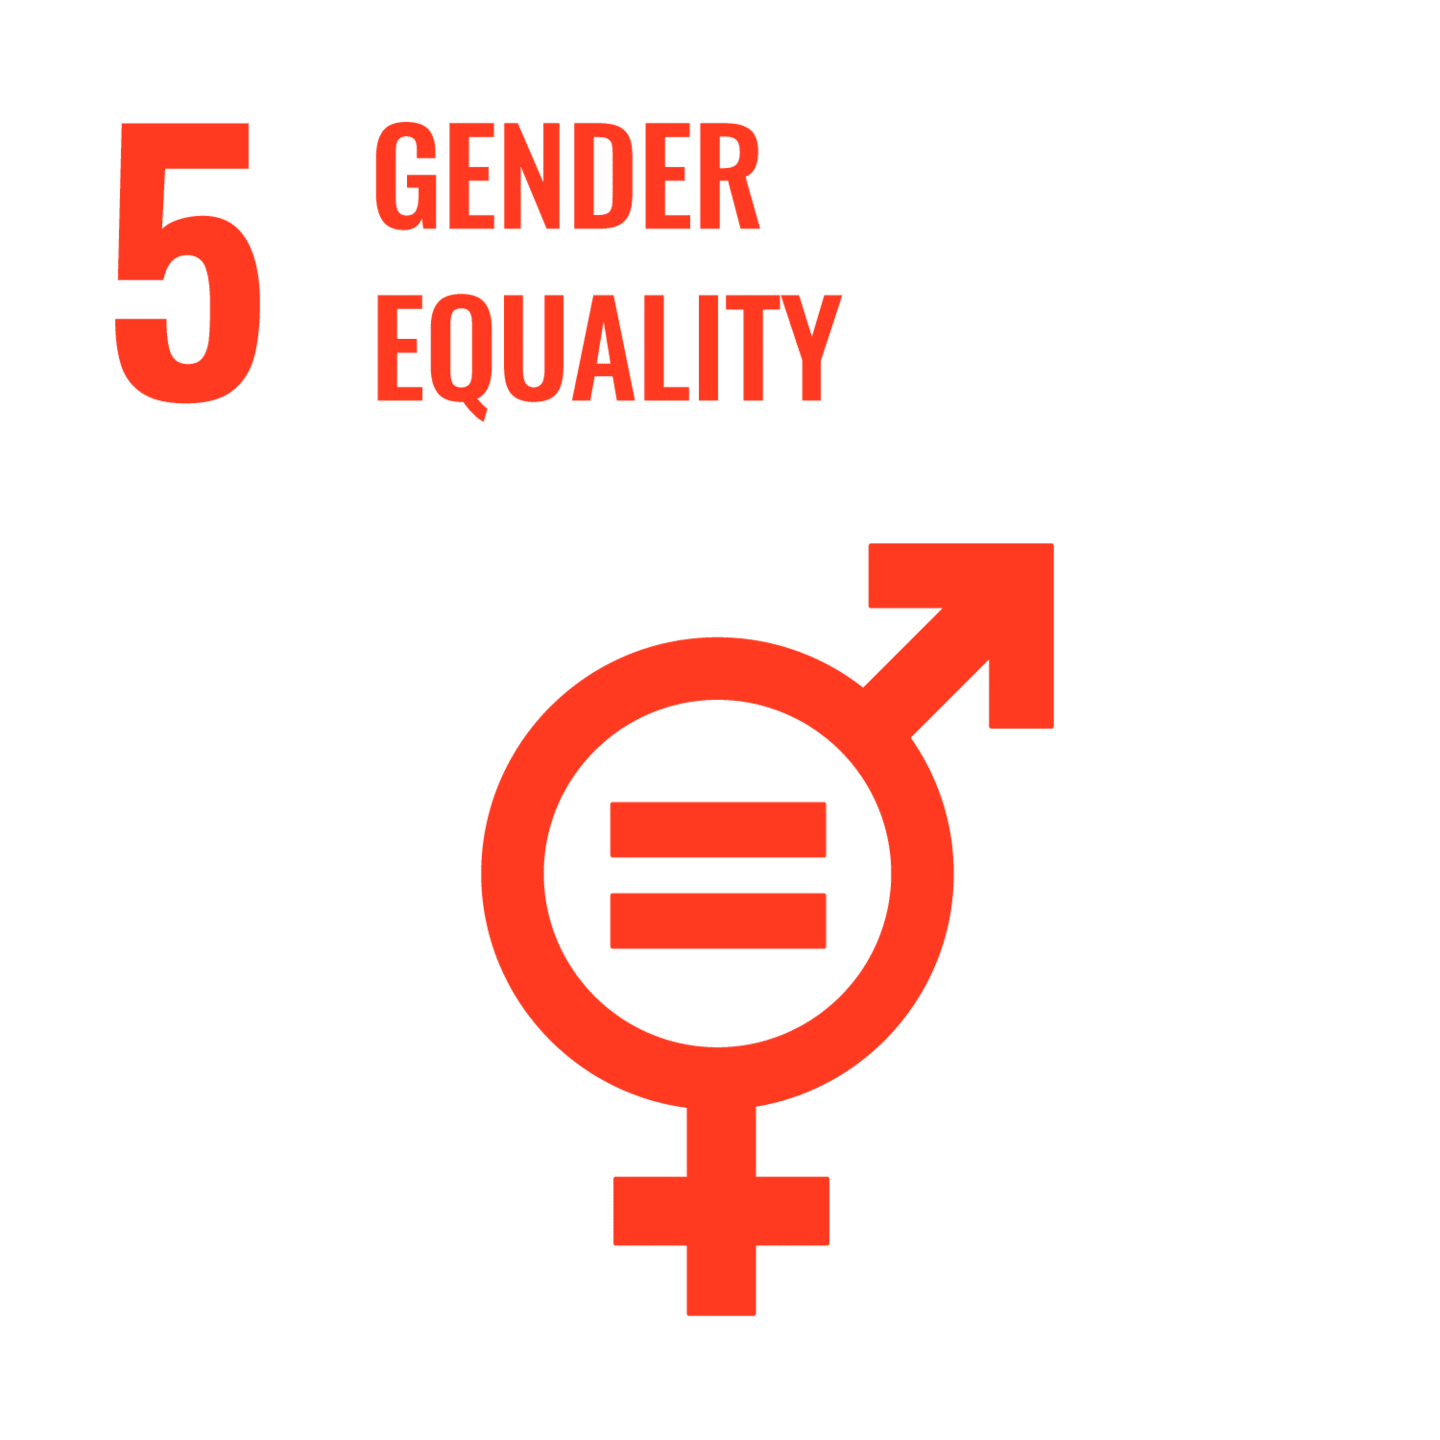 UN Sustainable Development Goal 5: Gender Equality